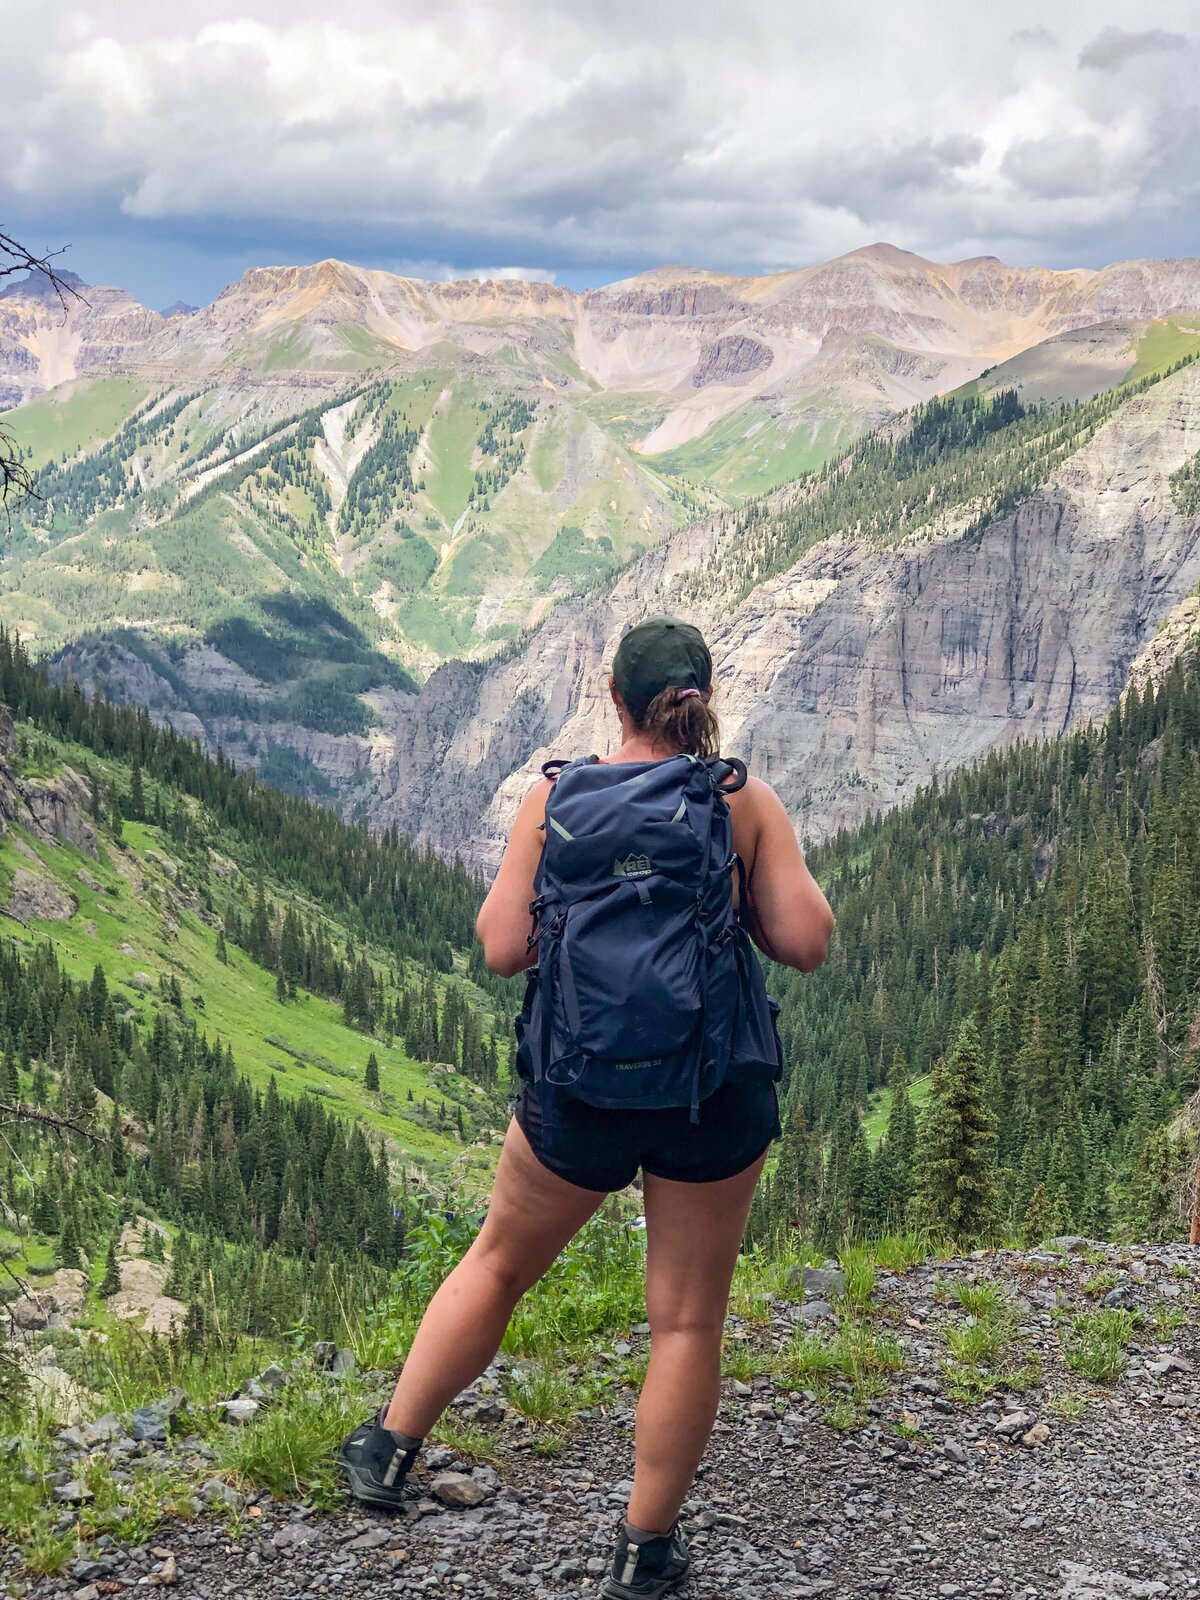 Valerie taking in the scenic views in Telluride during a hike